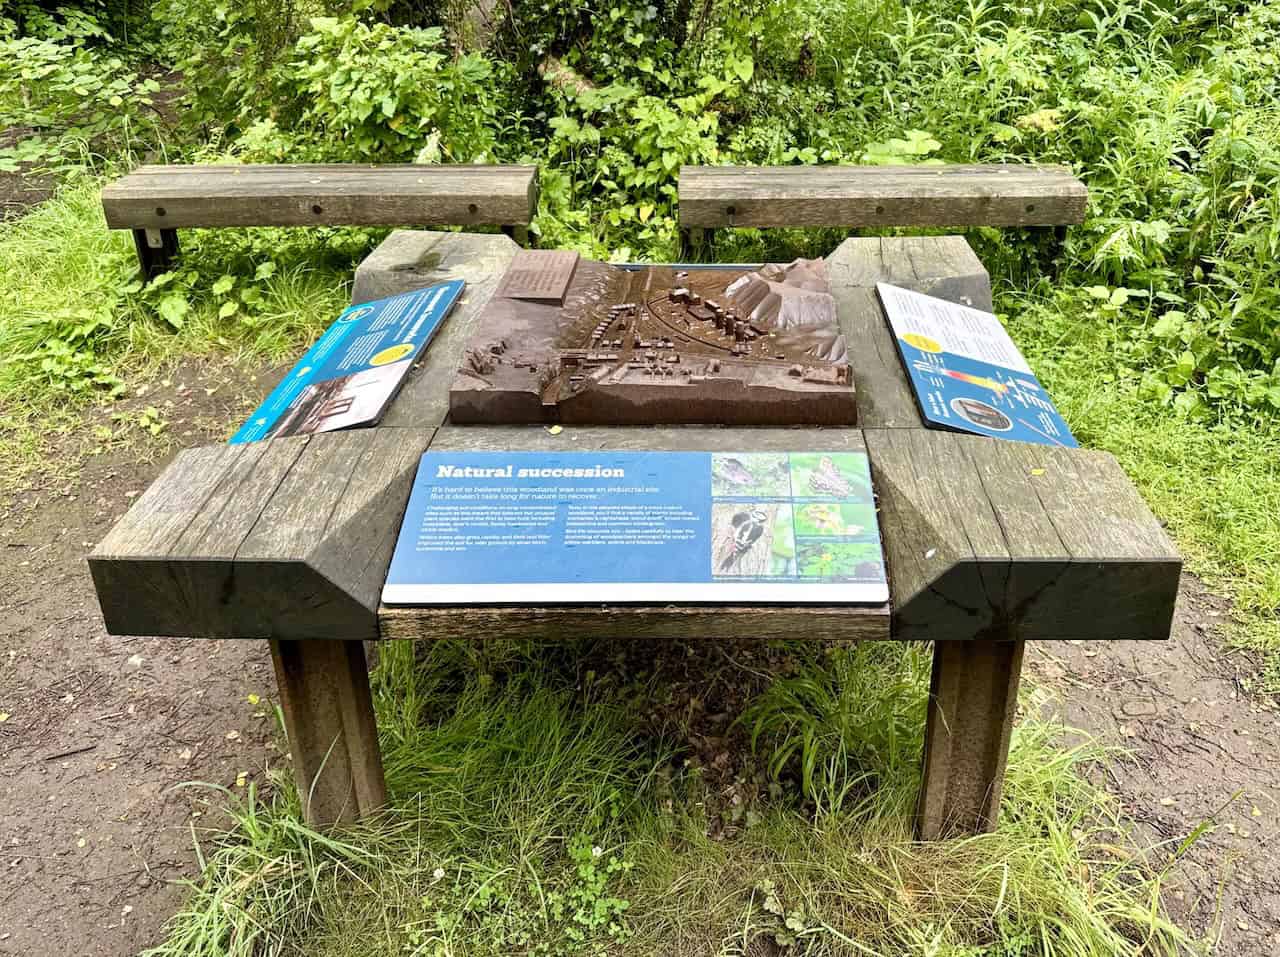 A serene seating area in woodland near the Grosmont car park, featuring display boards about the historic Grosmont Ironworks.